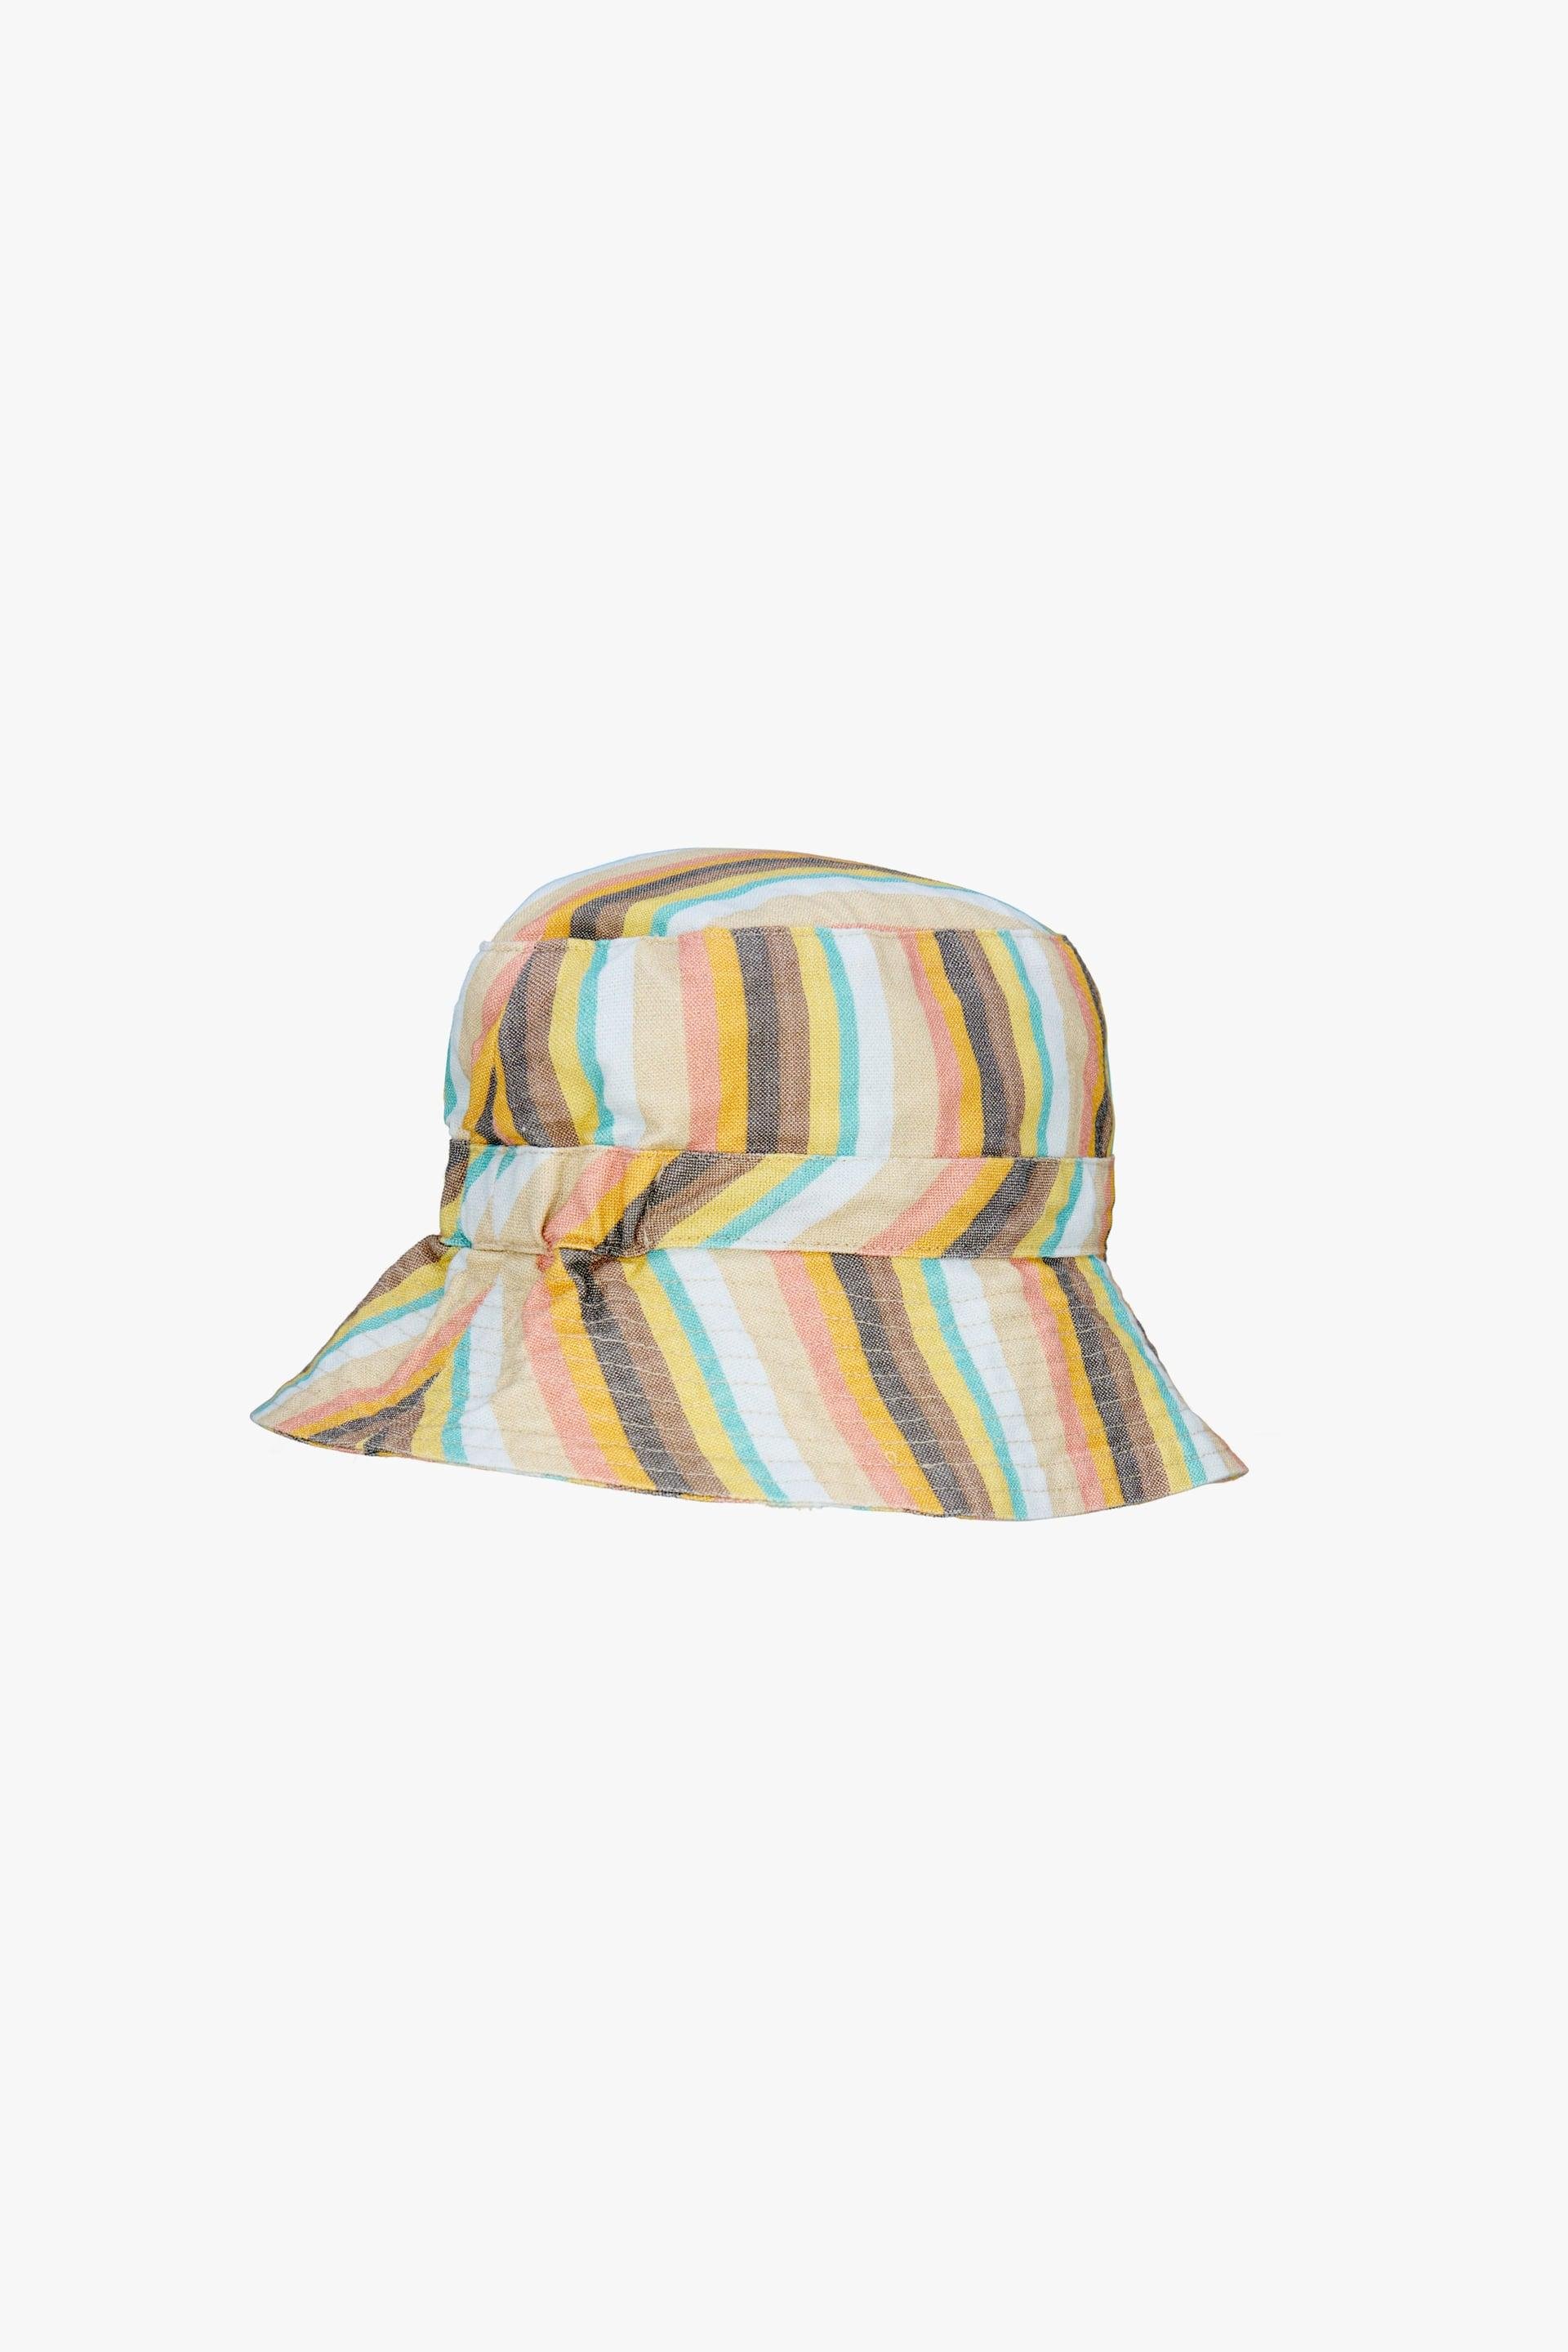 STRIPED COTTON HAT LIMITED EDITION by ZARA